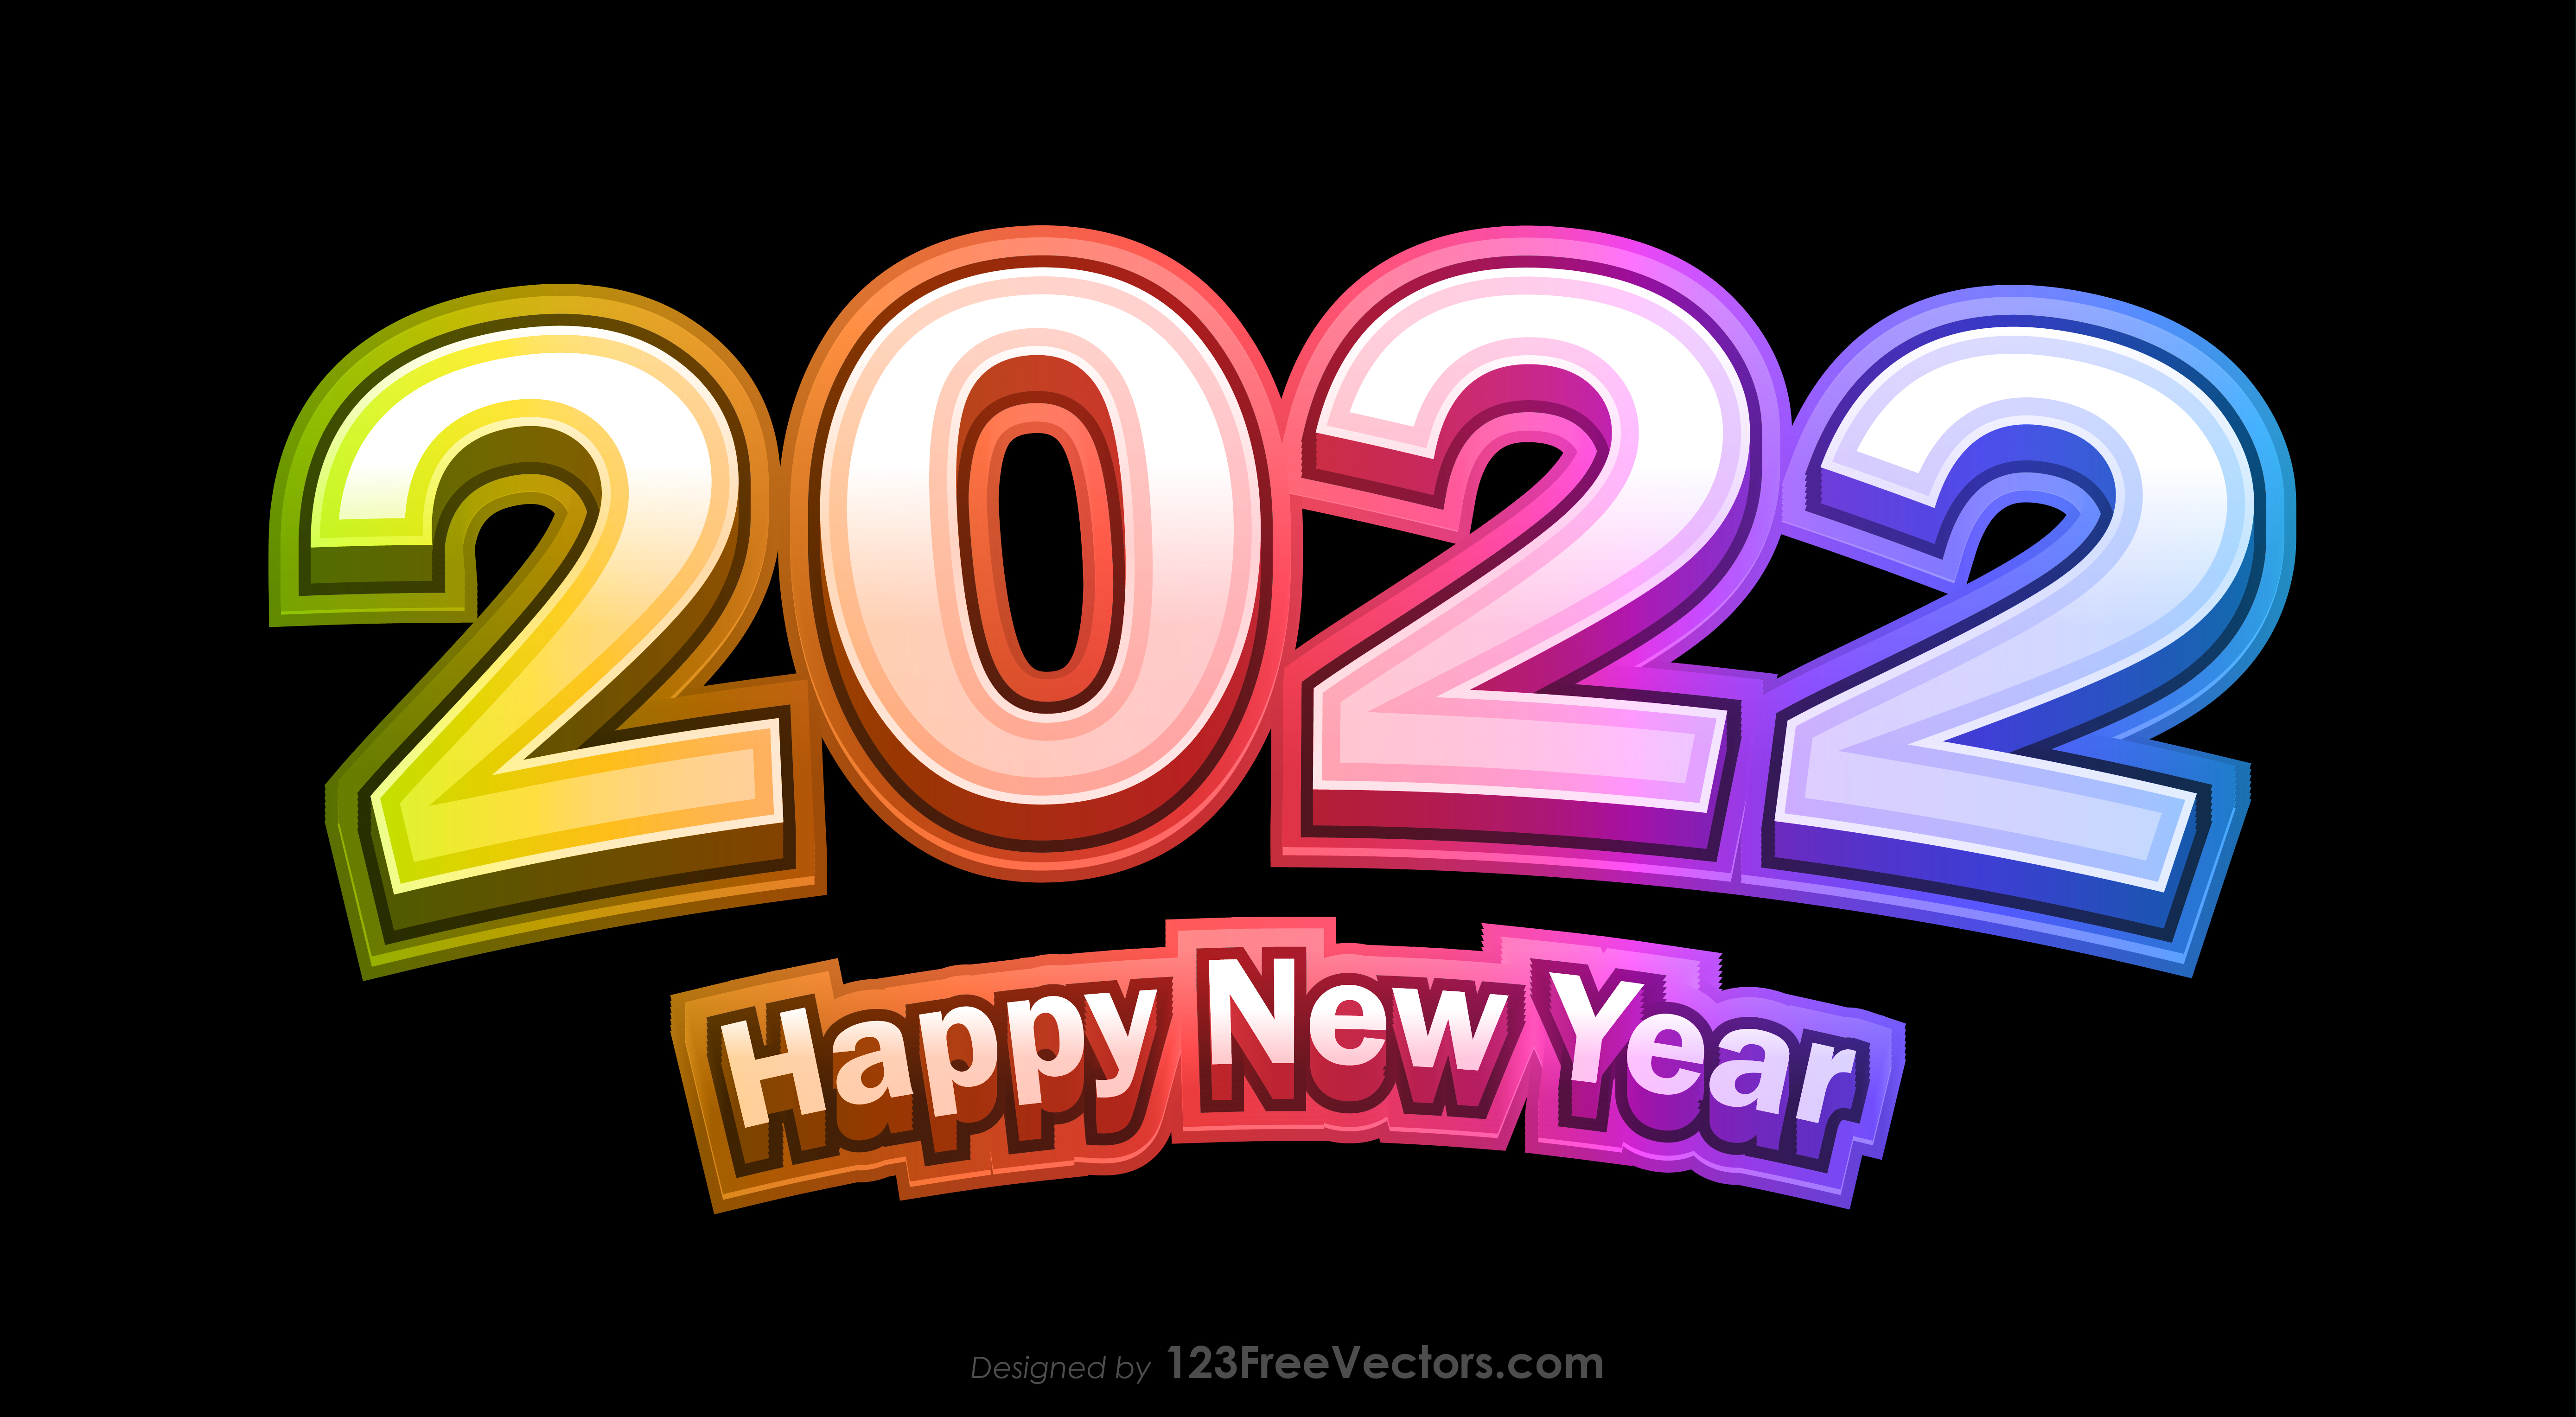 Free Happy New Year 2022 Colorful Background Vector Graphic